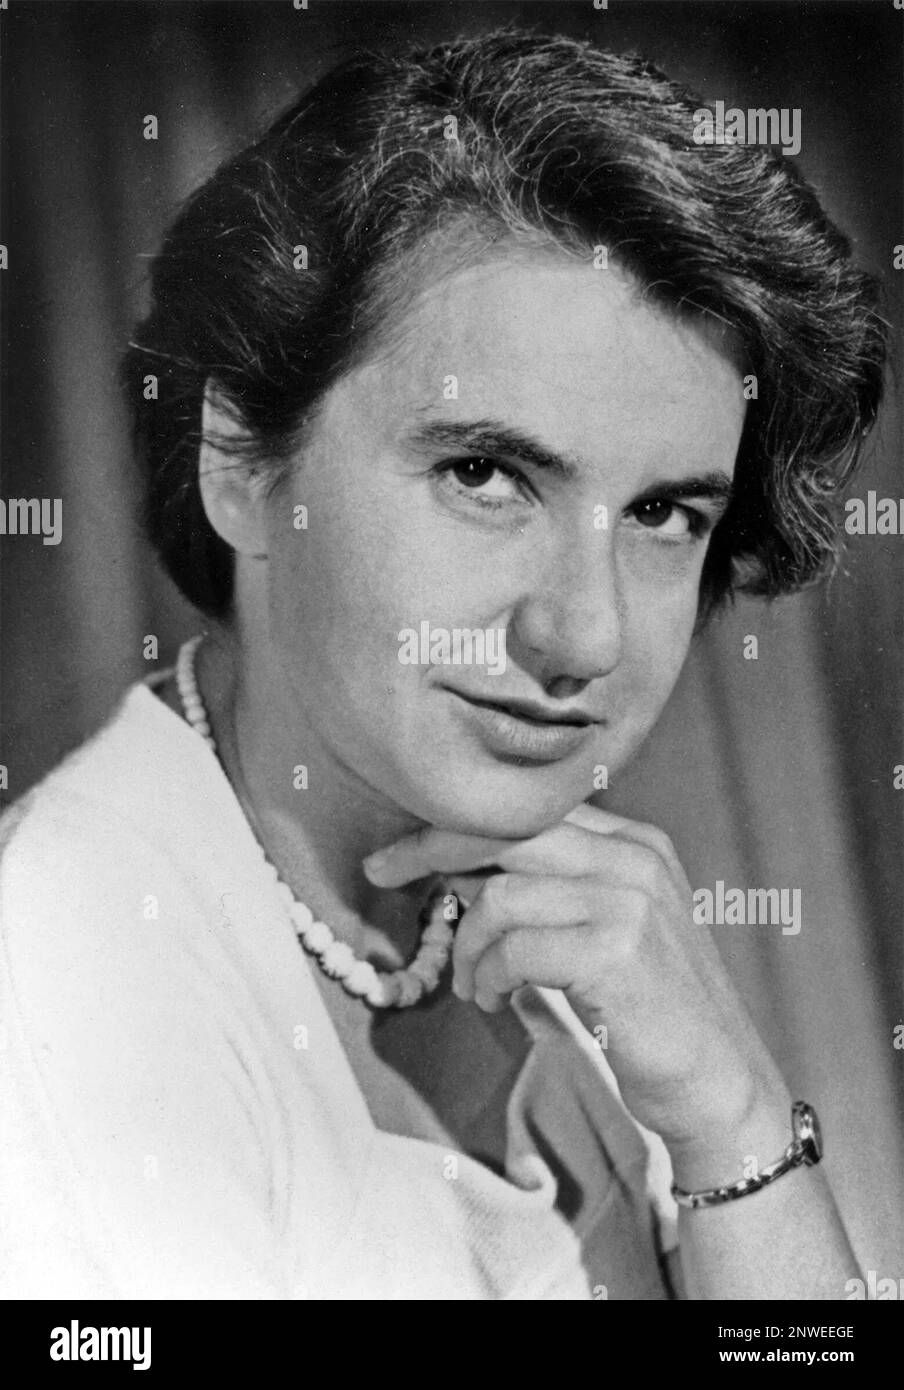 Rosalind Elsie Franklin (1920 – 1958) British chemist and X-ray crystallographer whose work was central to the understanding of the molecular structures of DNA (deoxyribonucleic acid) Stock Photo